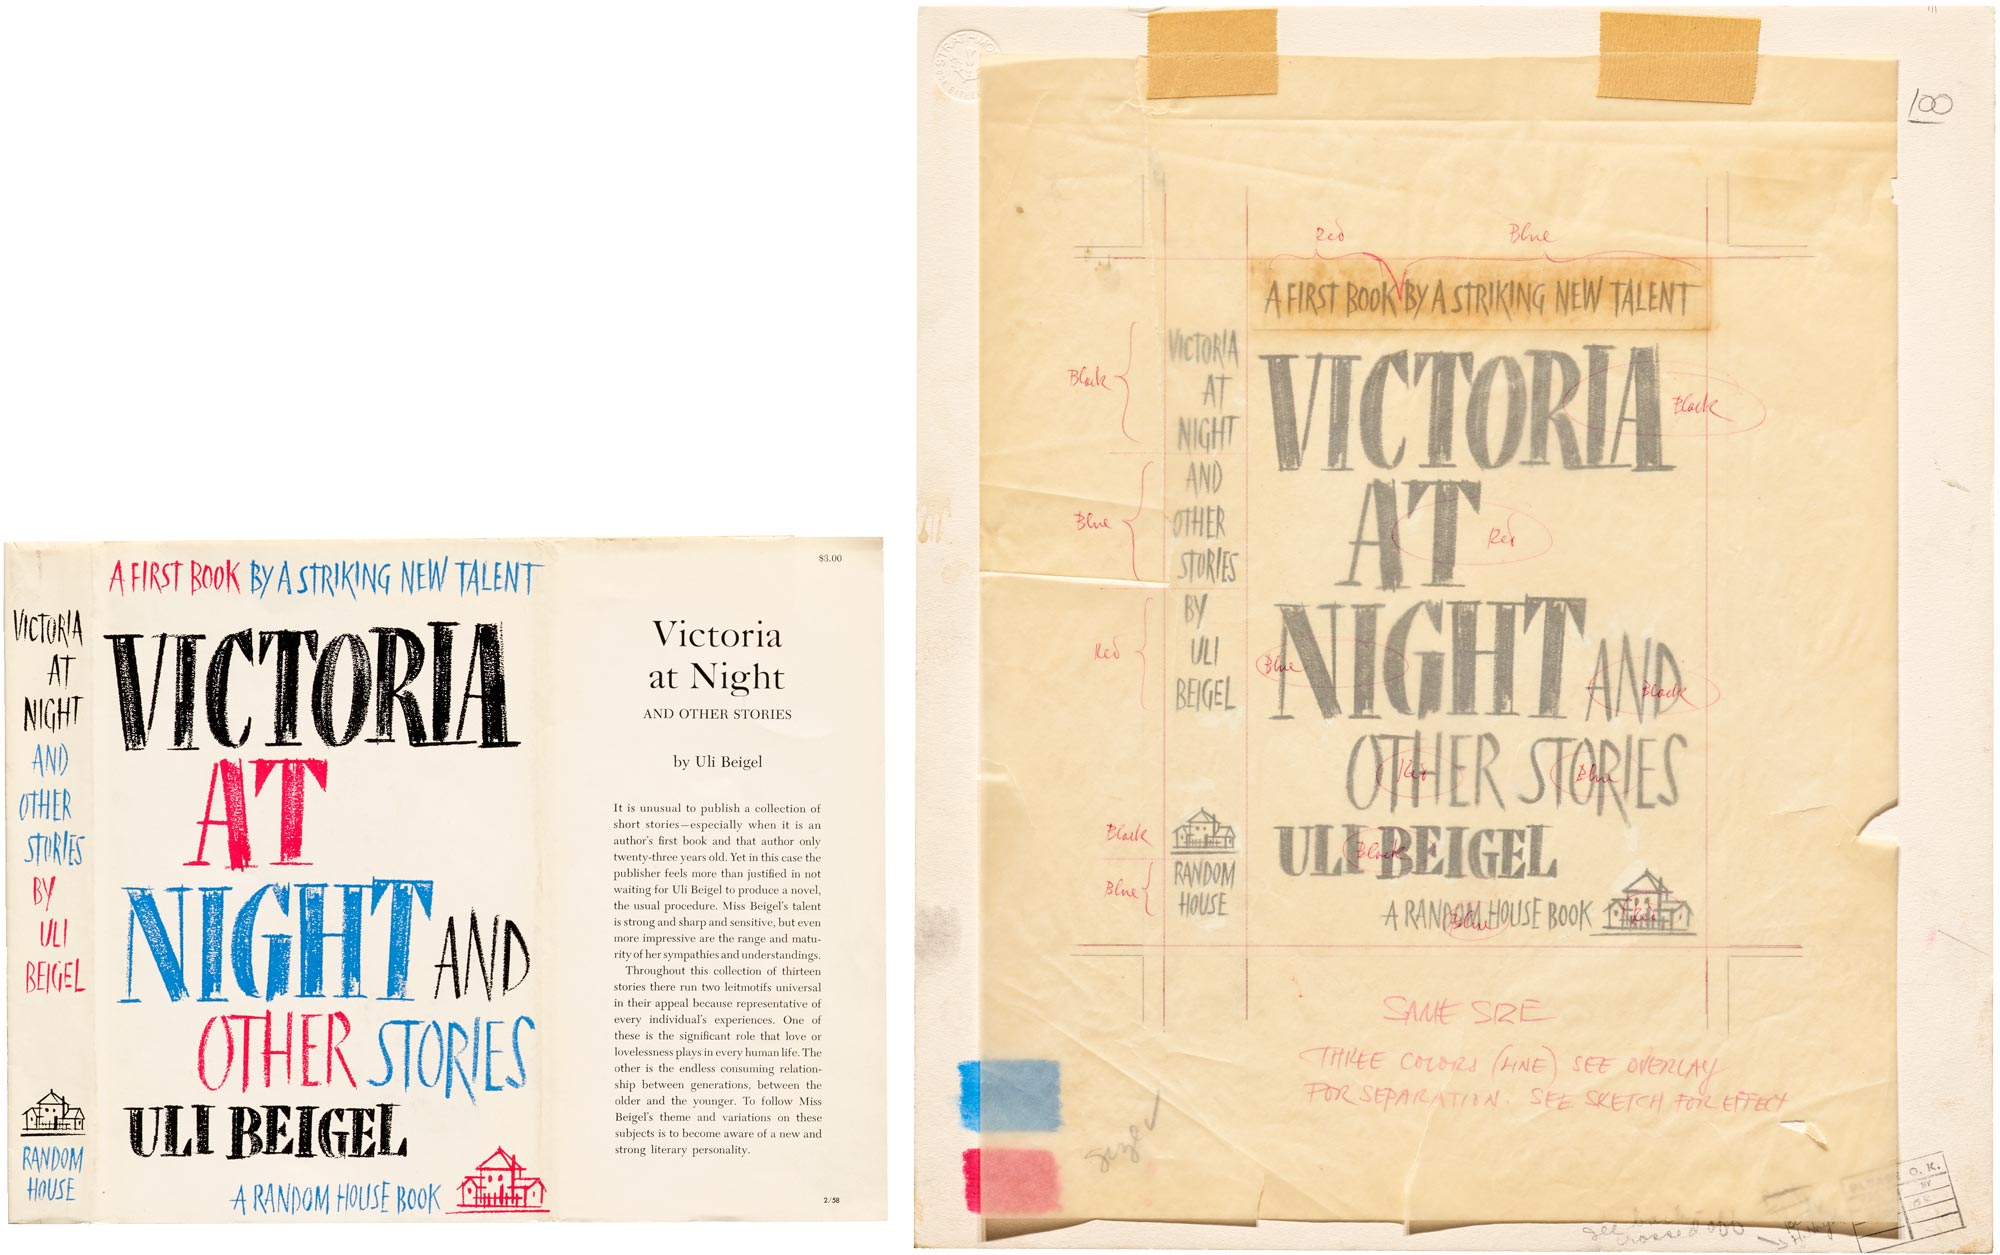 Philip Grushkin, jacket for “Victoria at Night and Other Stories”